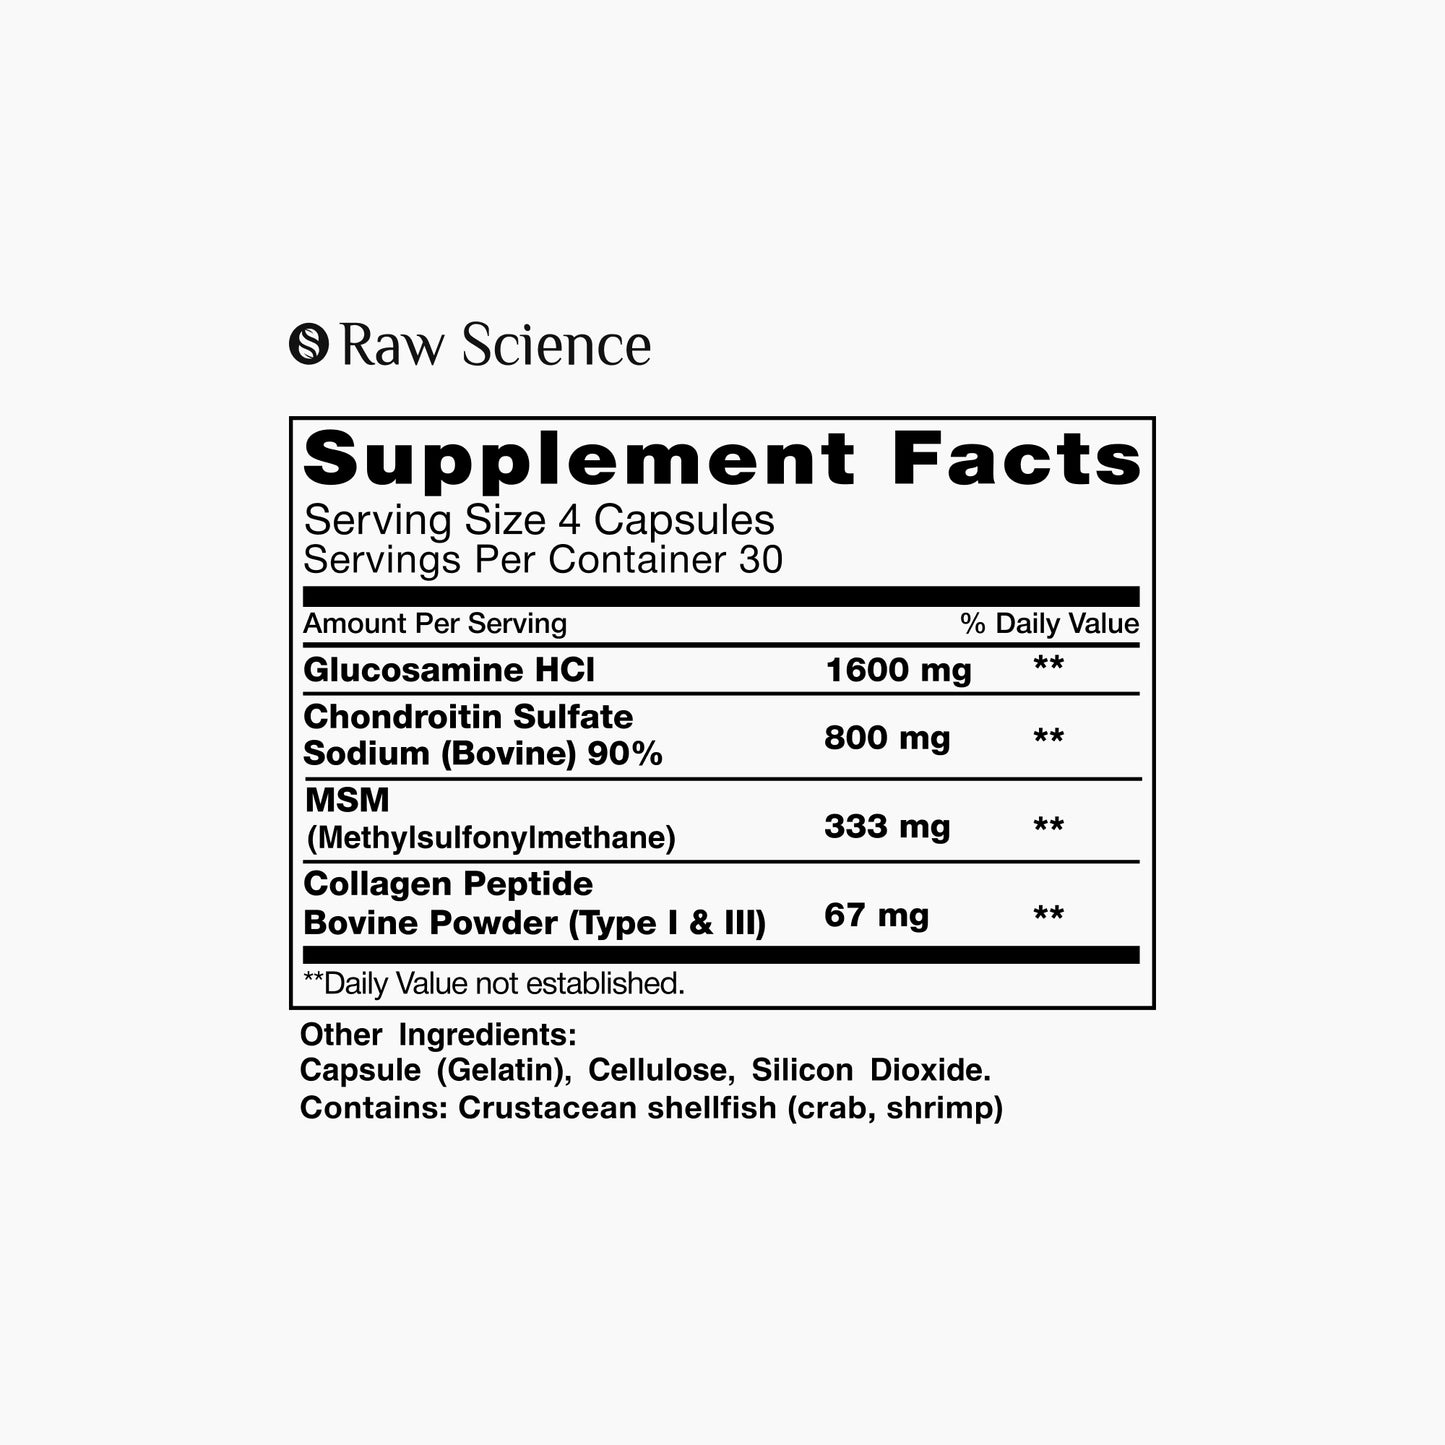 Glucosamine Chondroitin Complex with MSM